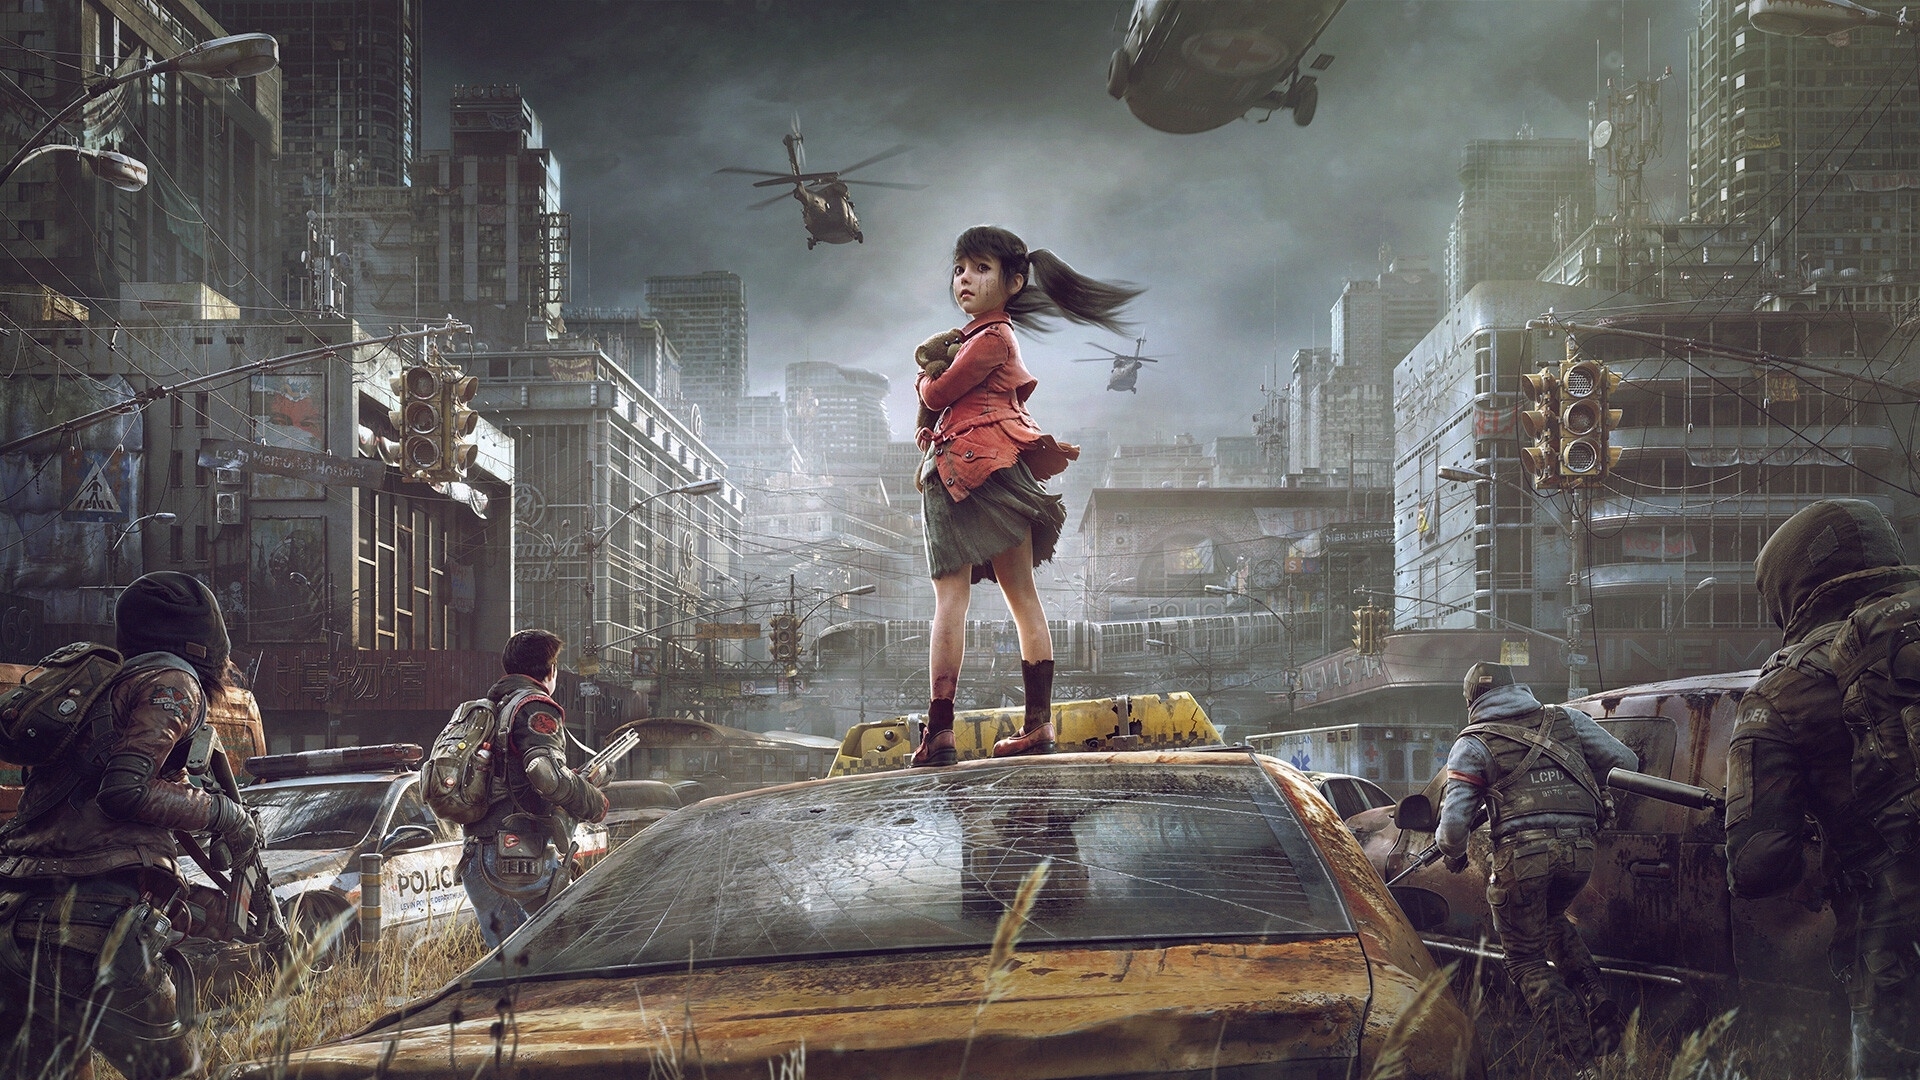 Small Girl In Post Apocalyptic